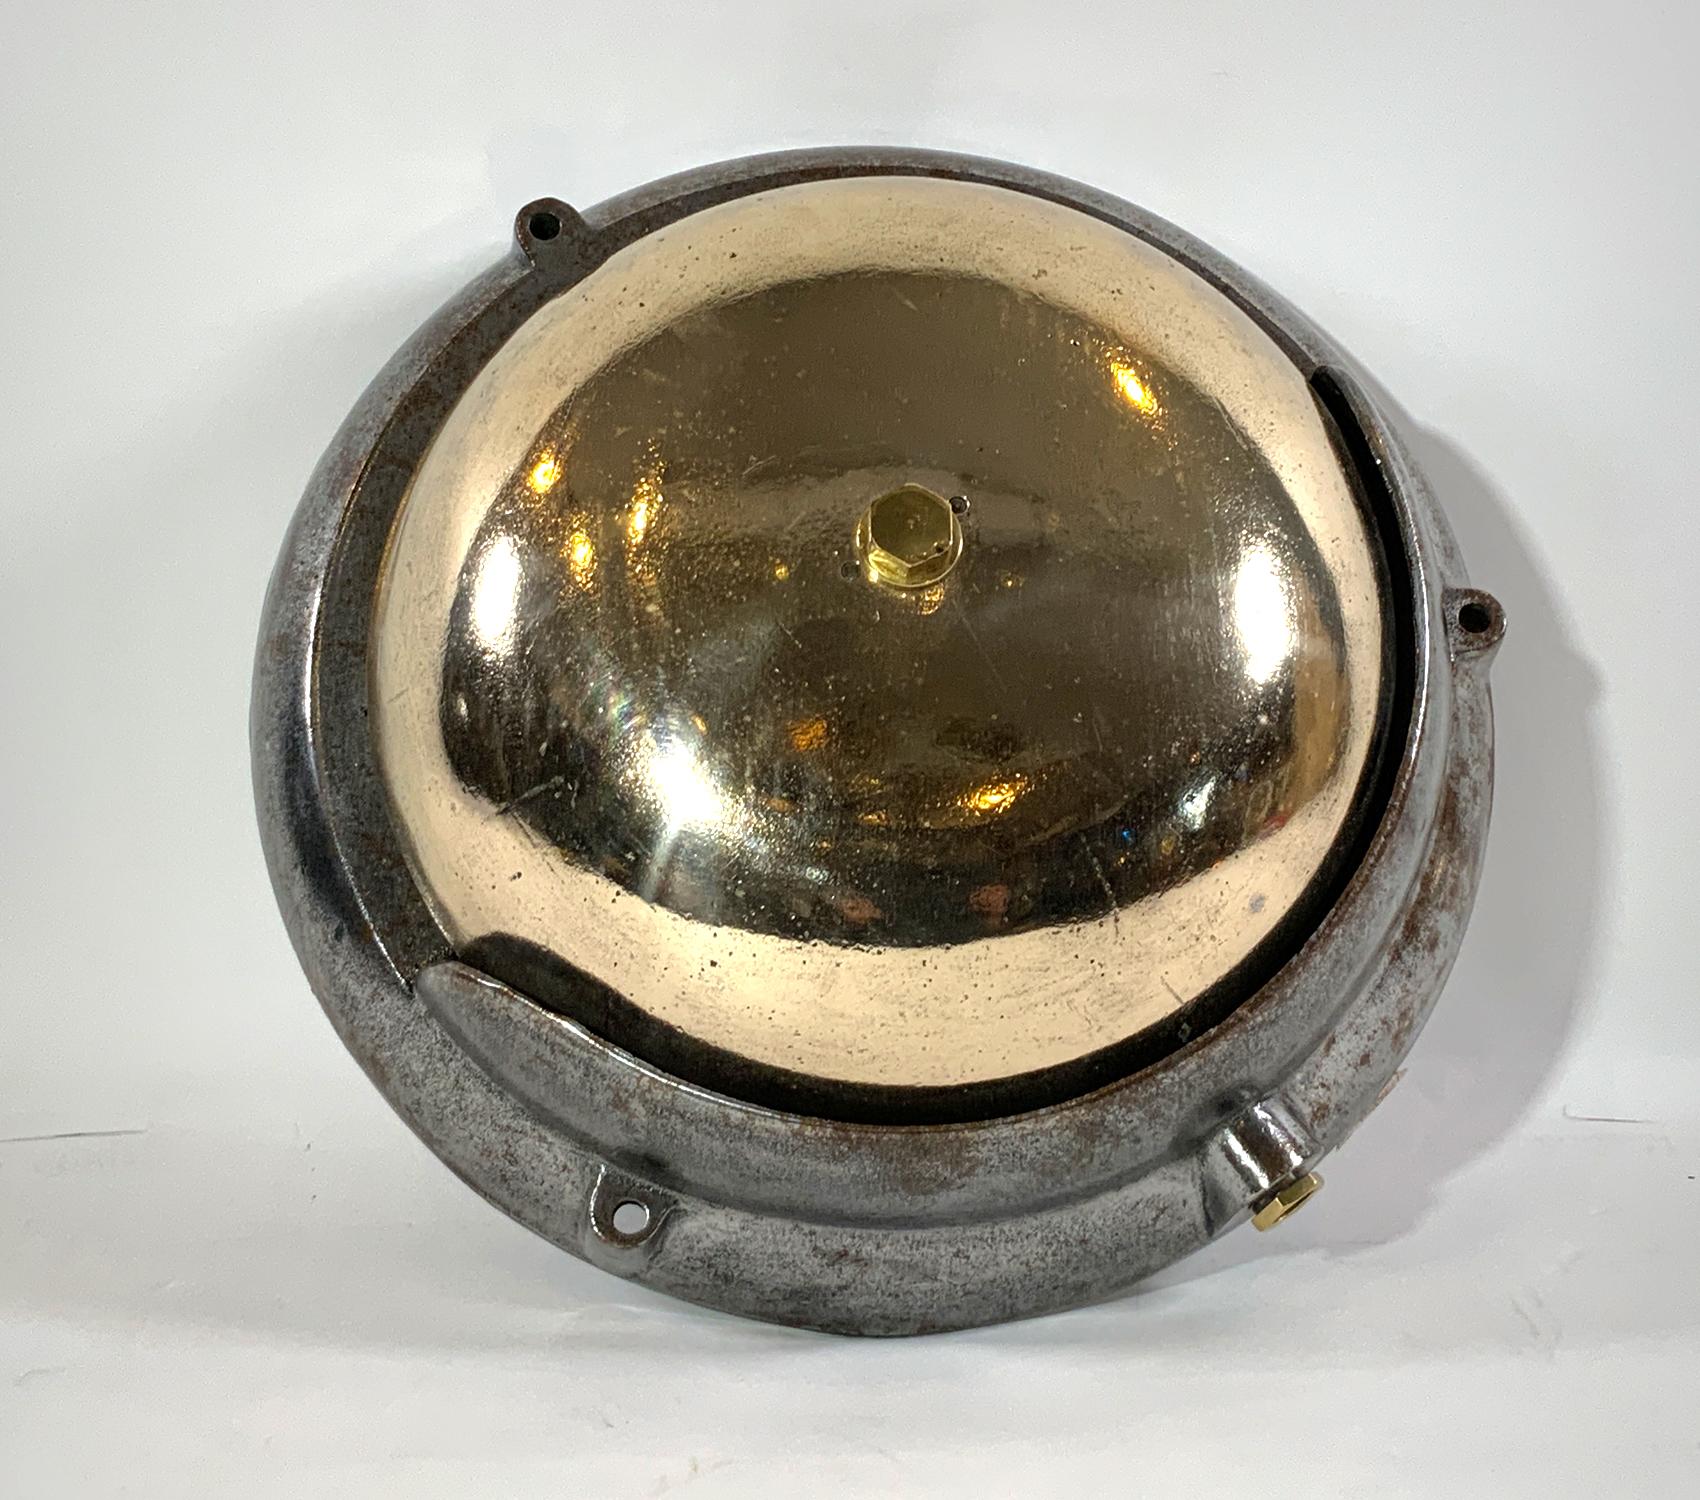 Large engine room bell from a ship. Polished brass bell is mounted onto a heavy steel housing. Big piece of industrial maritime gear. Very decorative. Circa 1950.